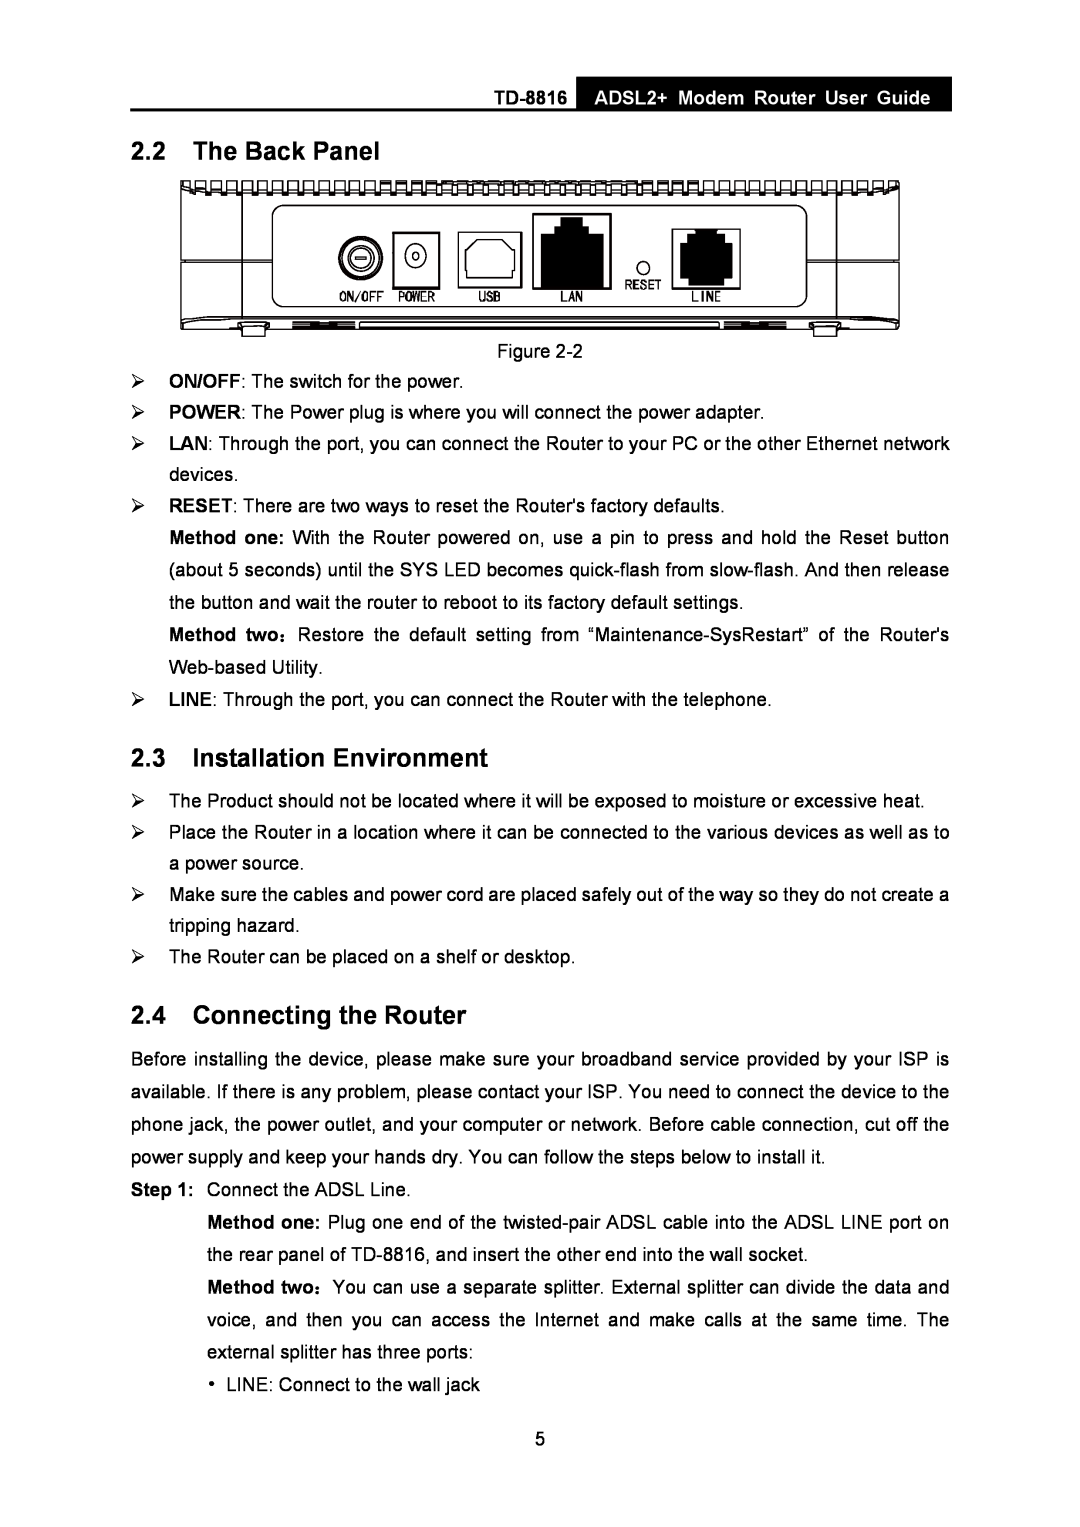 TP-Link TD-8816 manual The Back Panel, Installation Environment, Connecting the Router, ADSL2+ Modem Router User Guide 